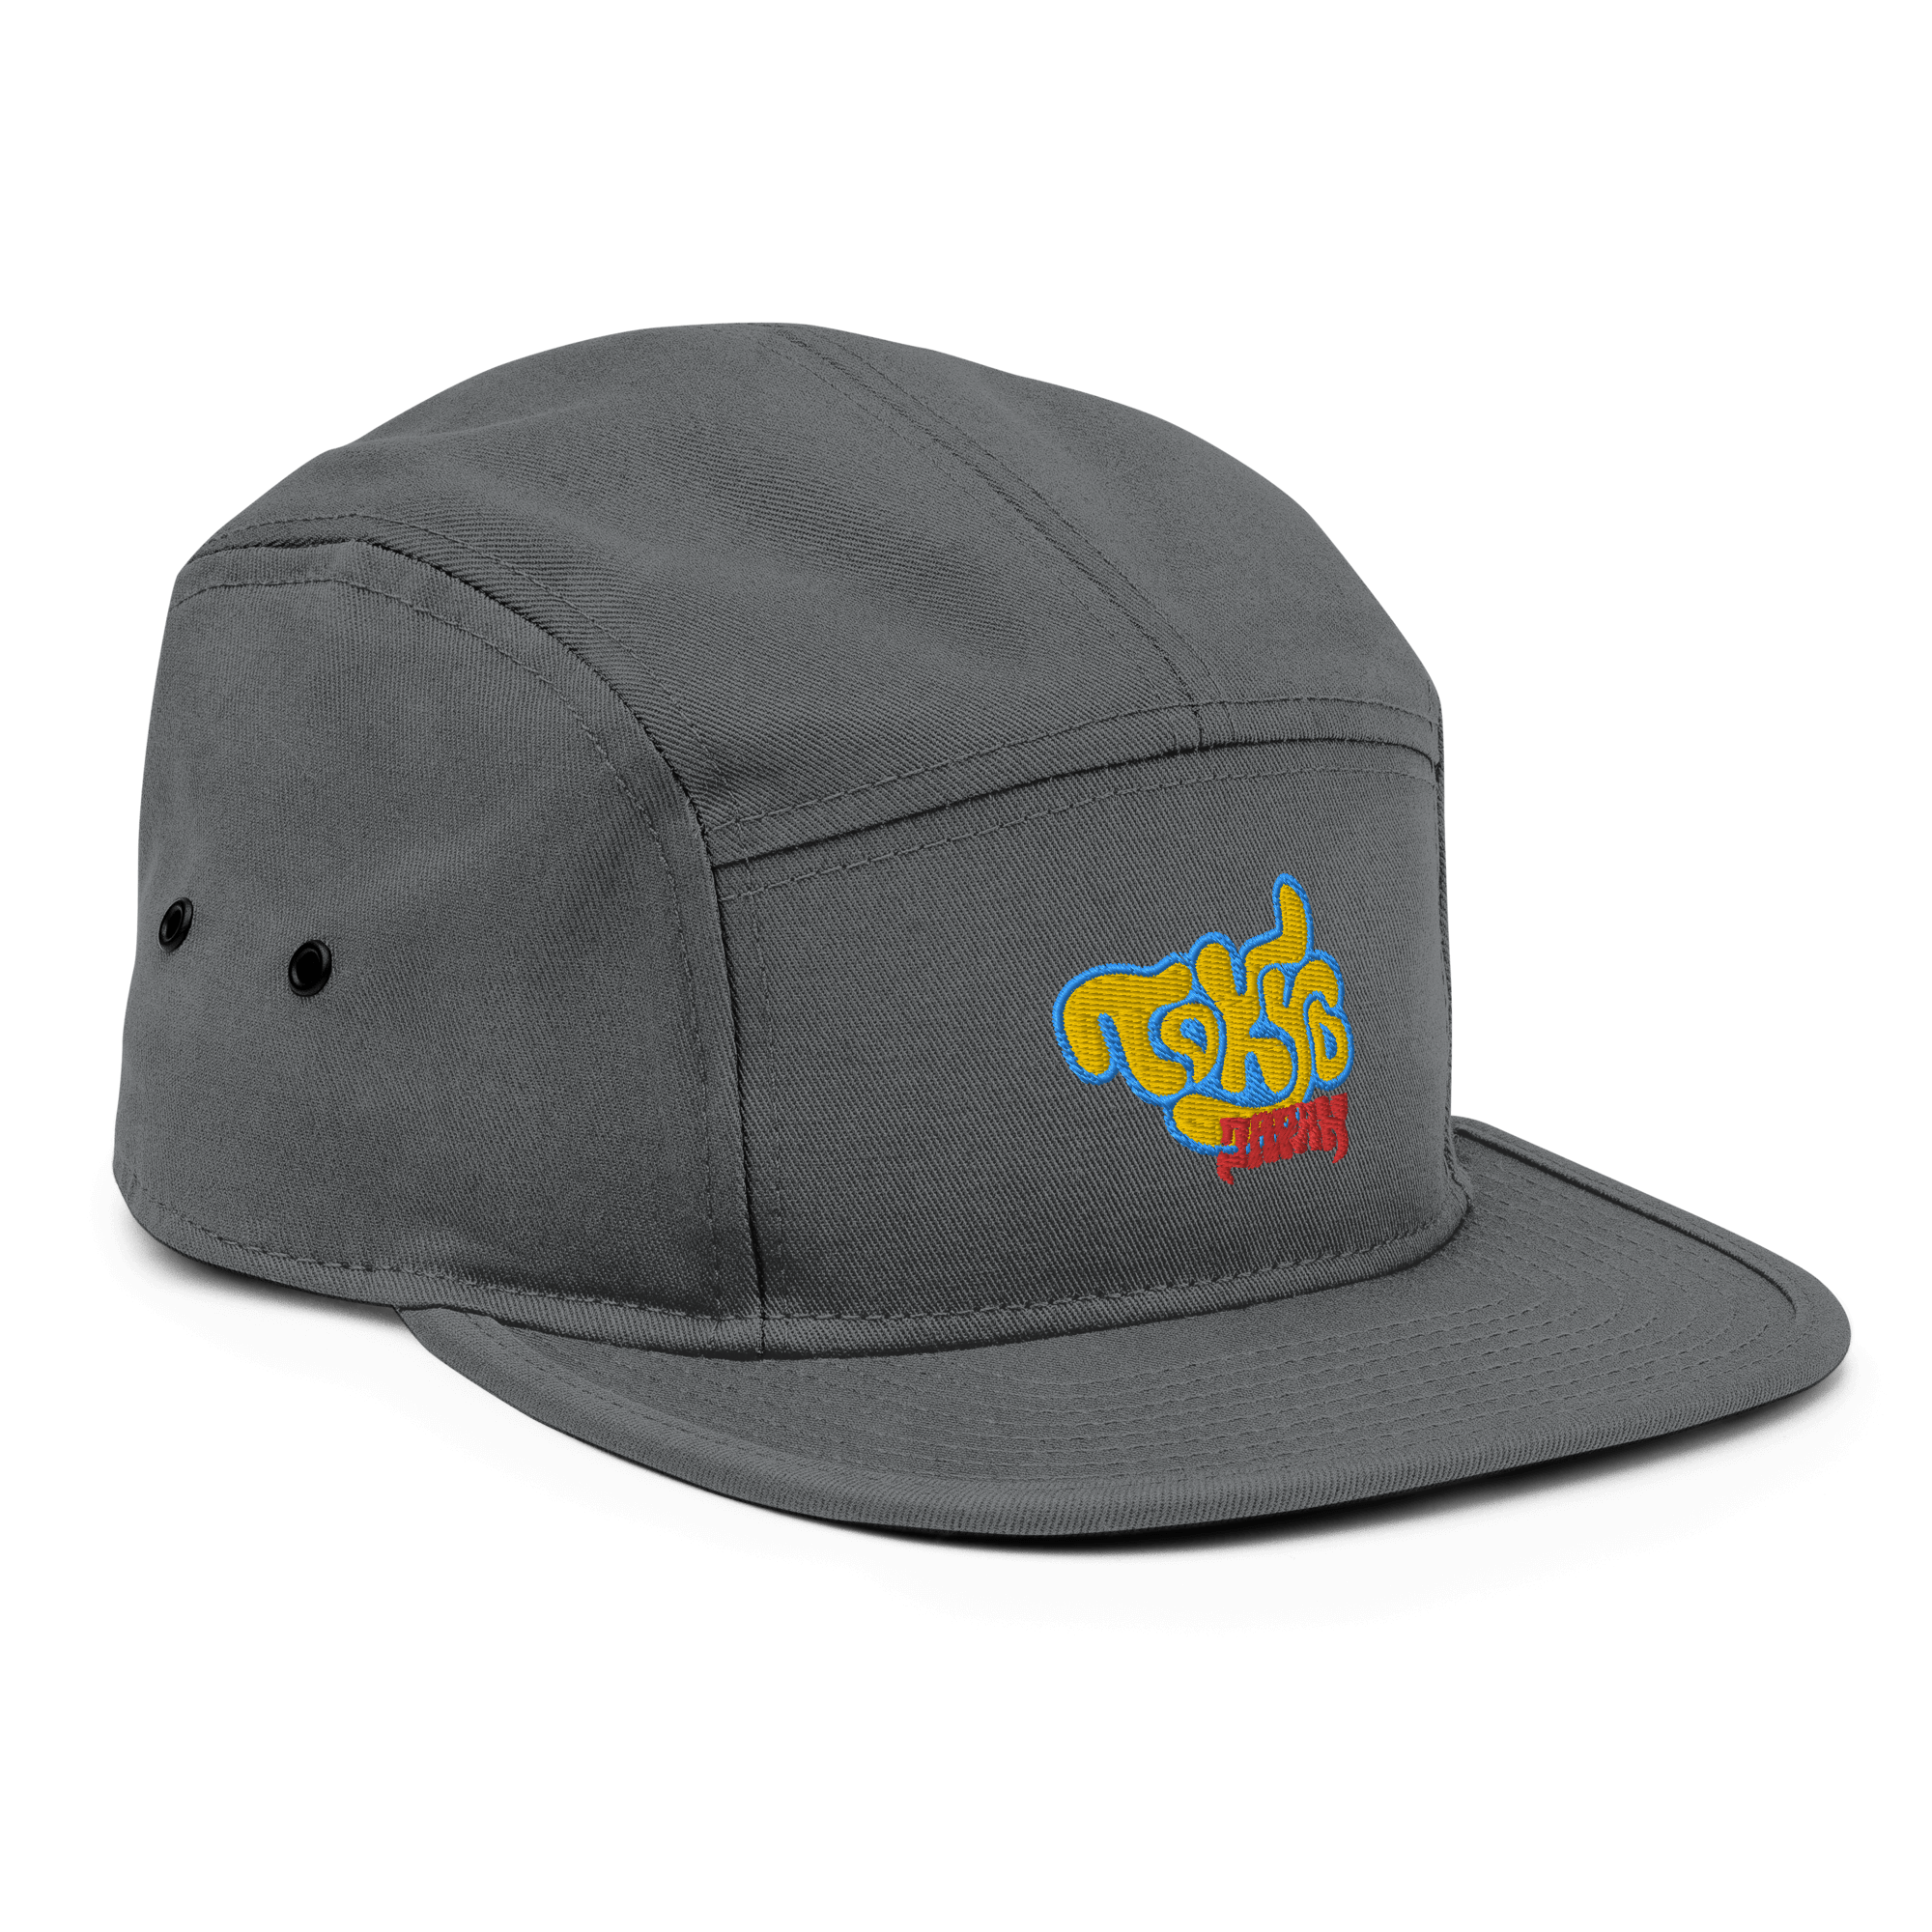 Tokyo Japan Camper CapElevate your style with the Tokyo Japan Camper Cap – a structured masterpiece with a firm front panel. Crafted exclusively for you upon order, the slight wait adds to its unique allure. Opting for on-demand production over bulk not o